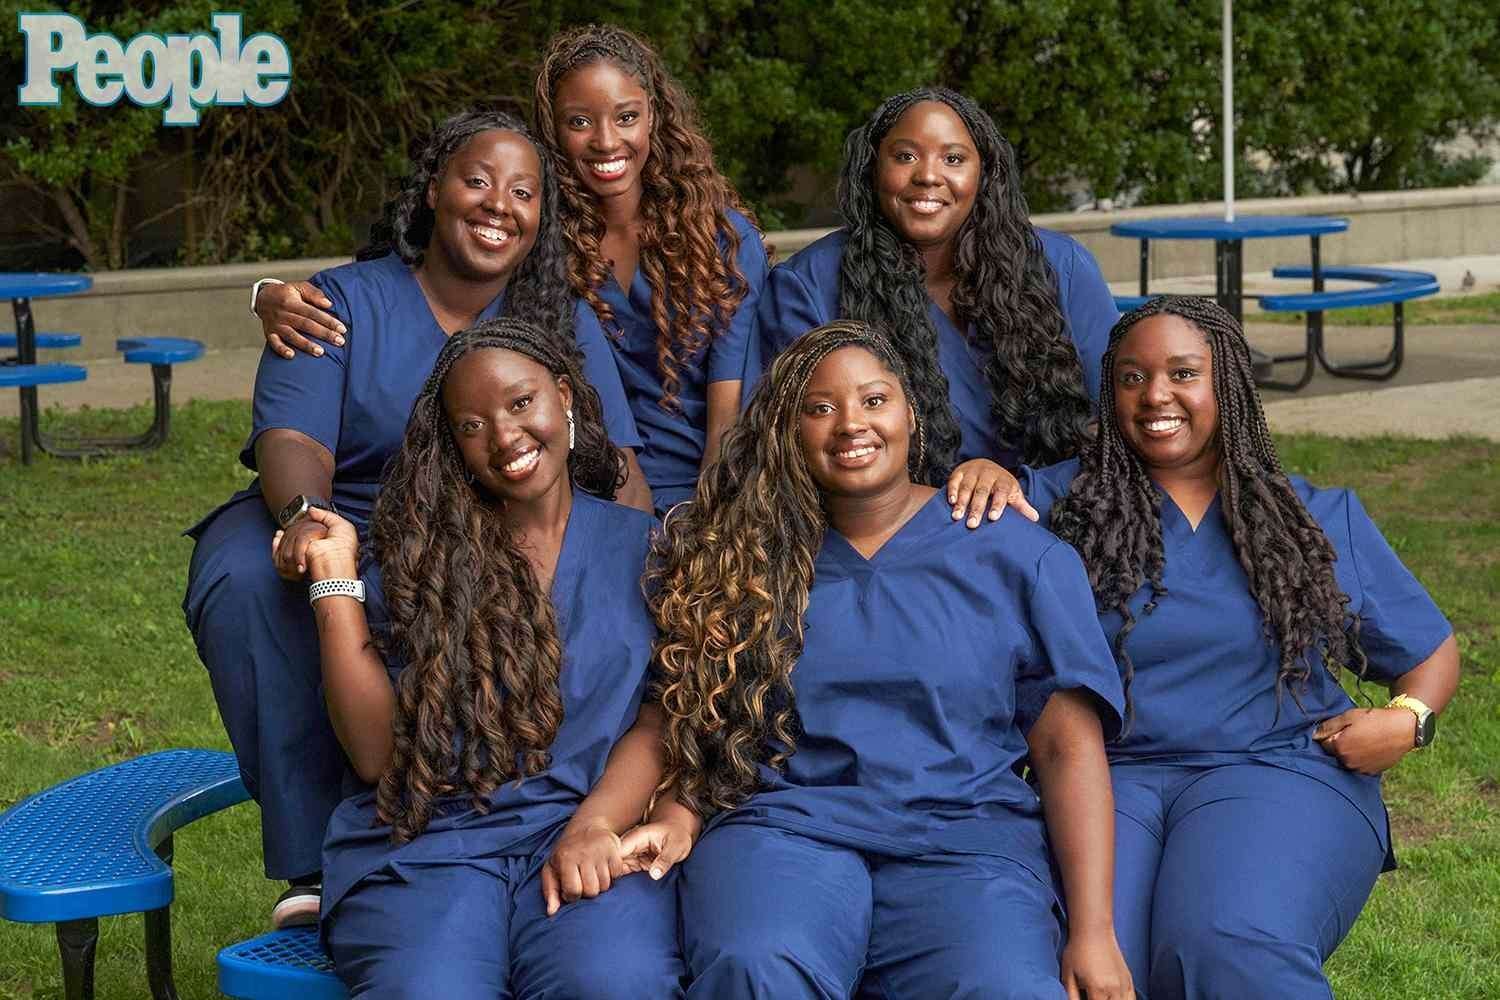 image for 6 Homeless Sisters Are All Becoming Nurses Together: 'It’s Our Bond That Kept Us Going' (Exclusive)